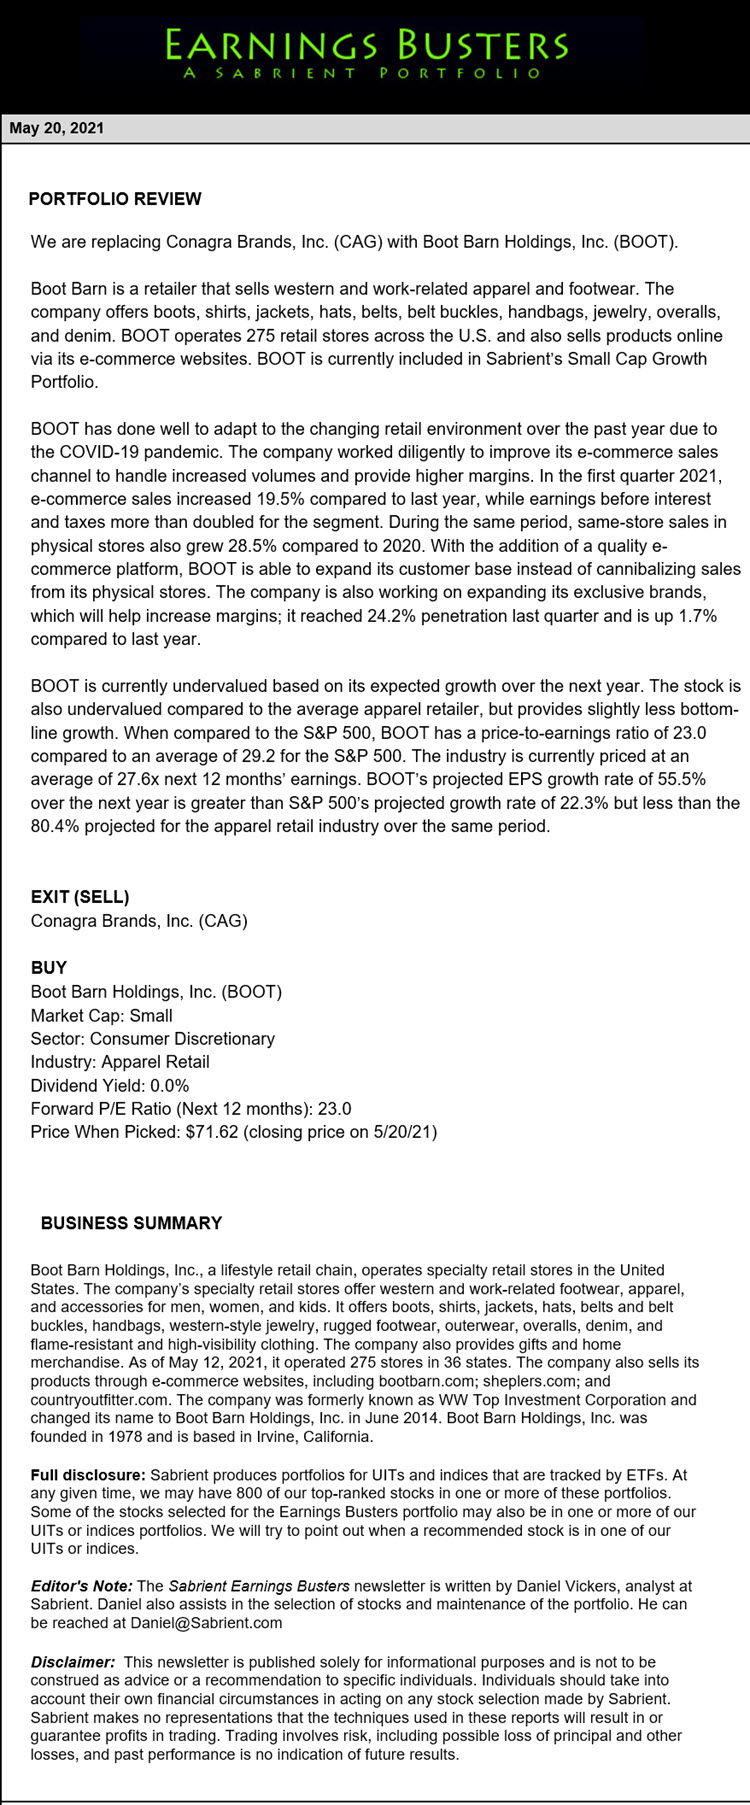 Earnings Busters Newsletter - May 20, 2021